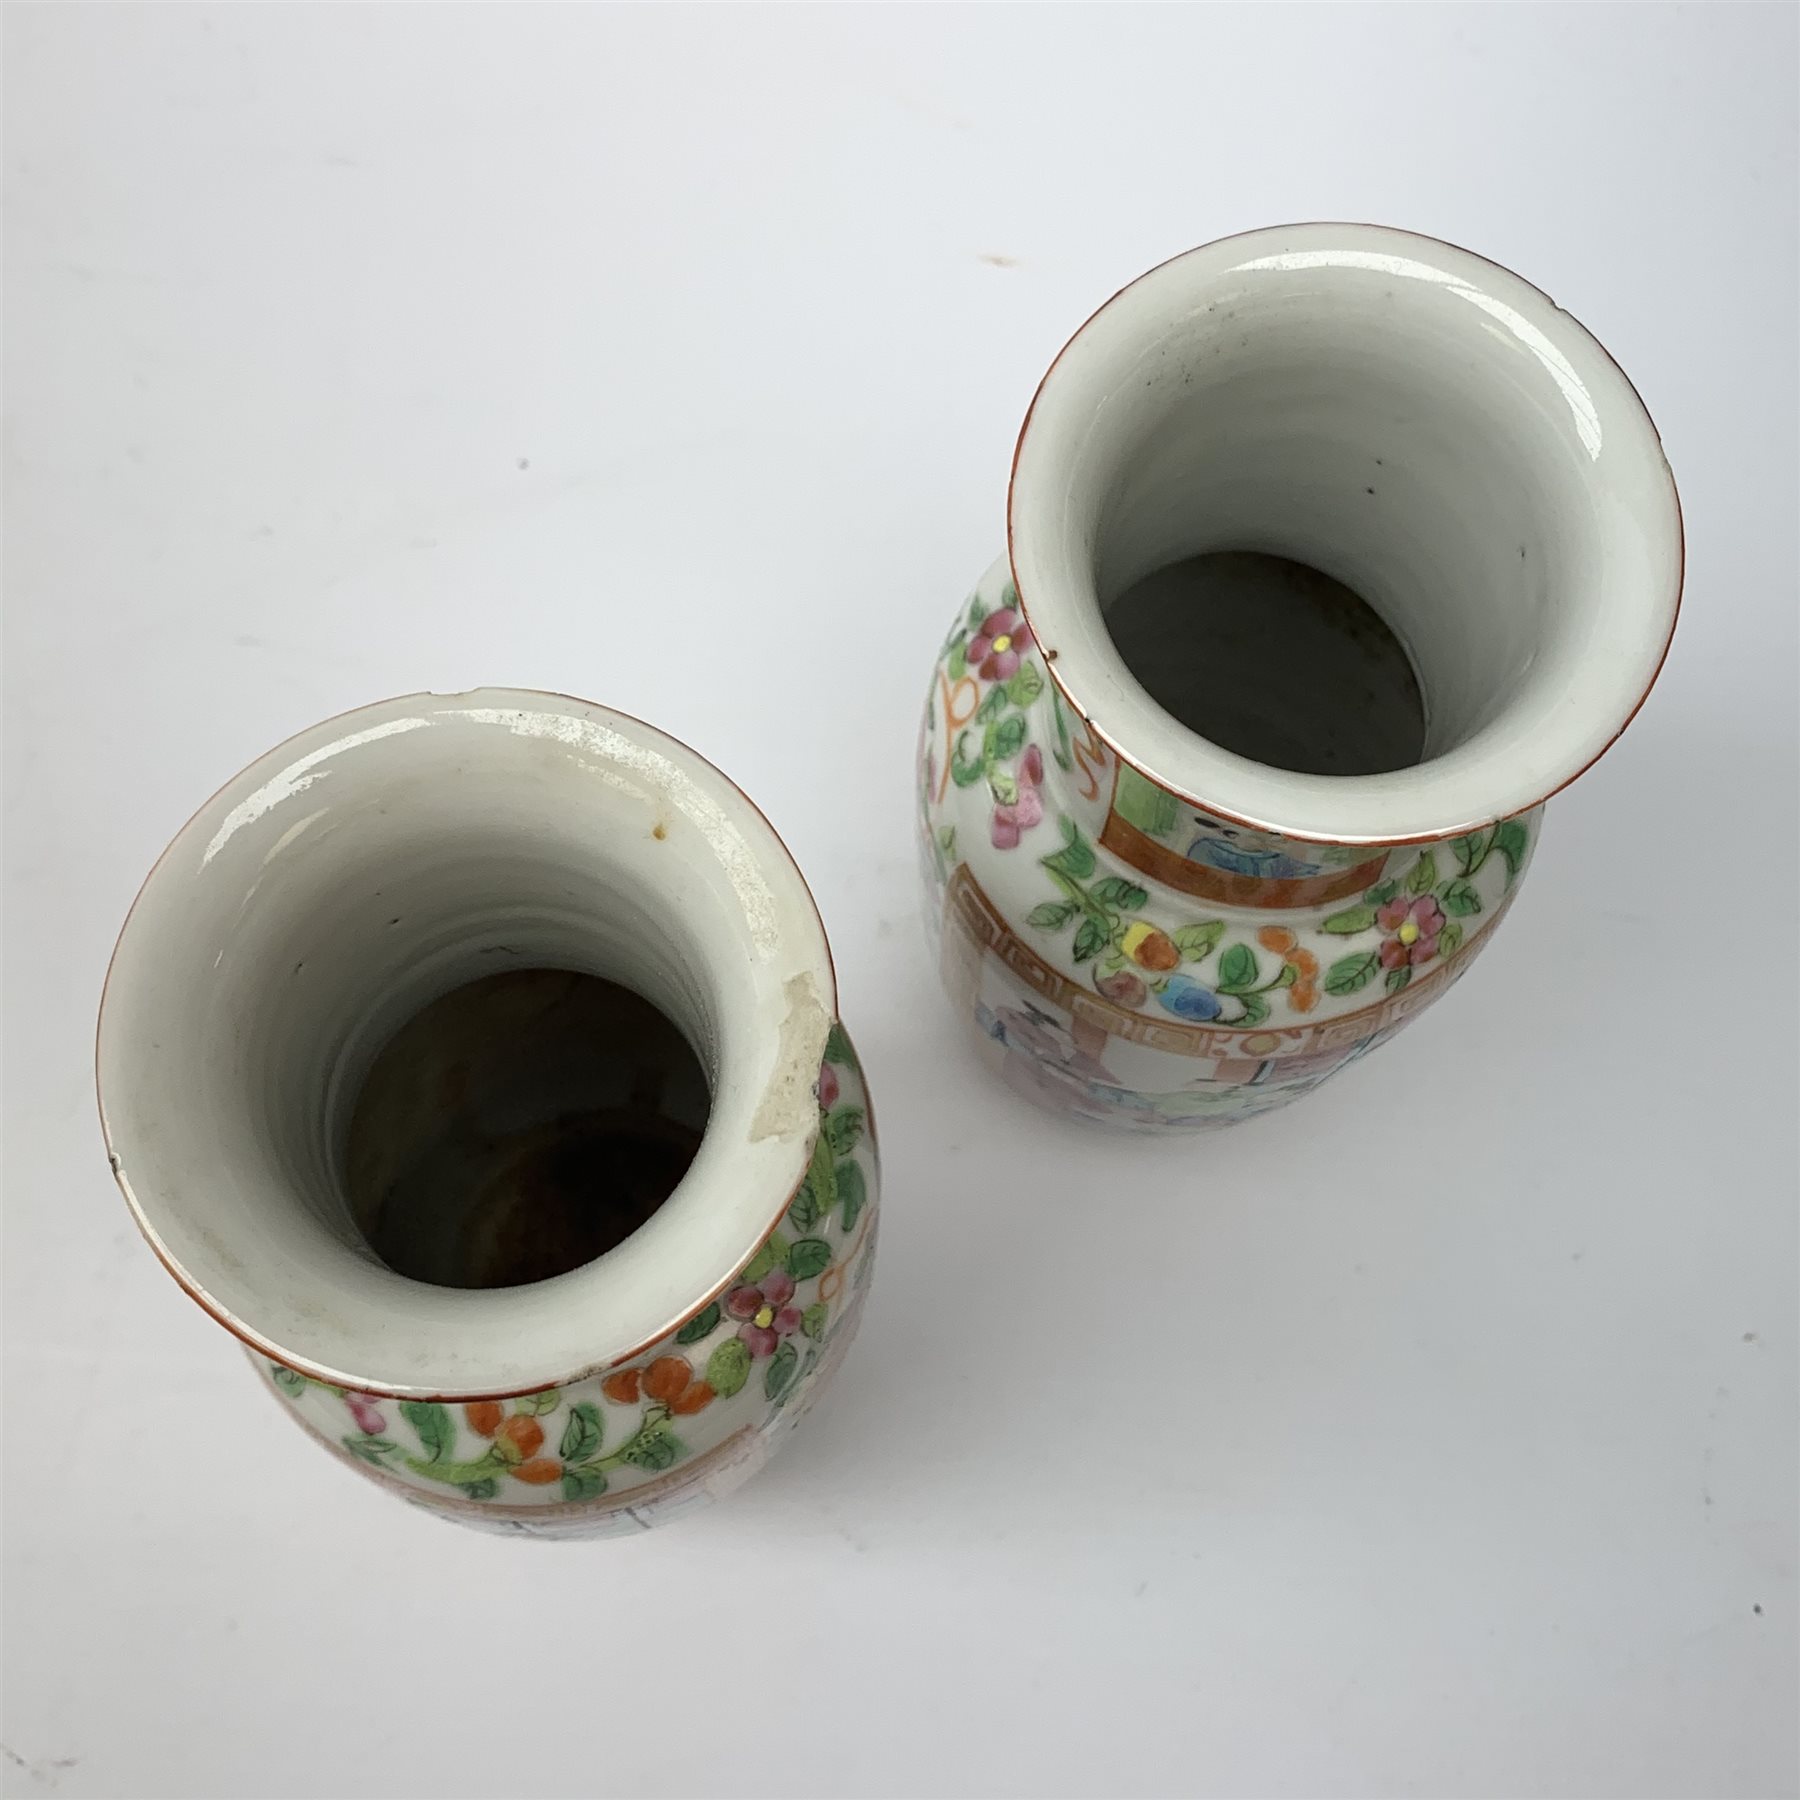 Pair of late 19th century Doulton Lambeth Silicon ware vases and a pair of 19th century Cantonese Fa - Image 3 of 4